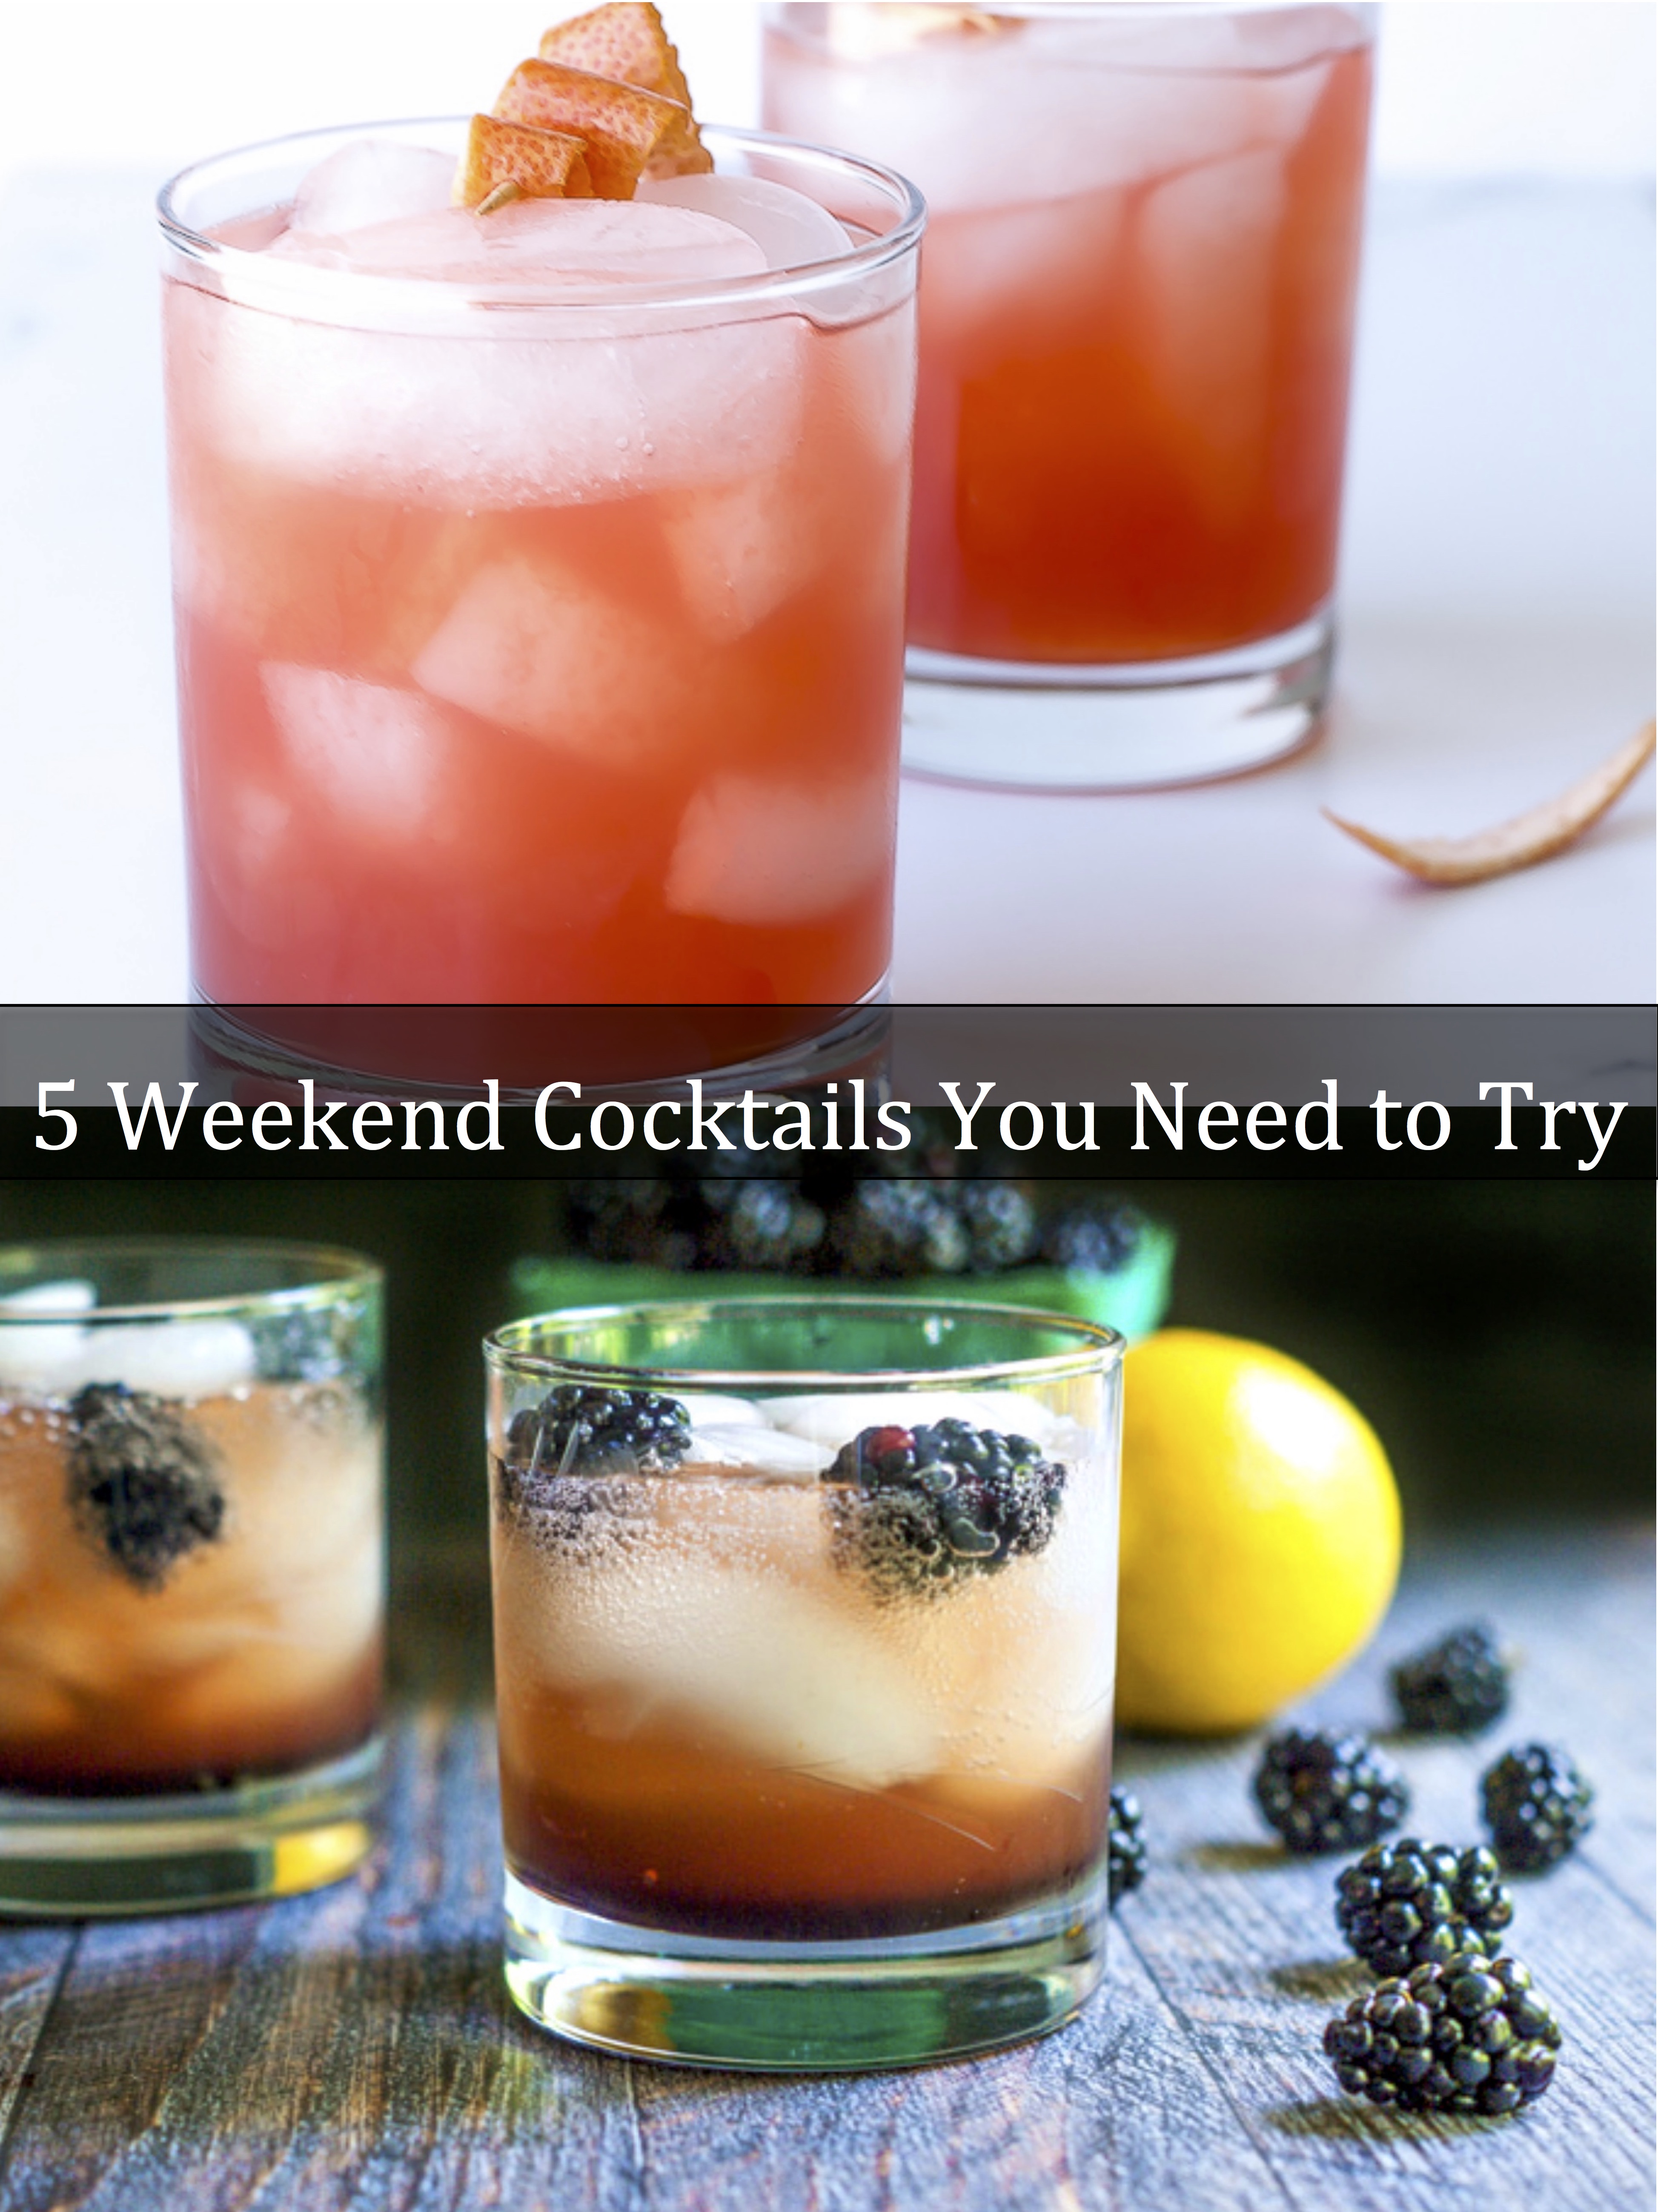 5 Weekend Cocktails You Need to Try